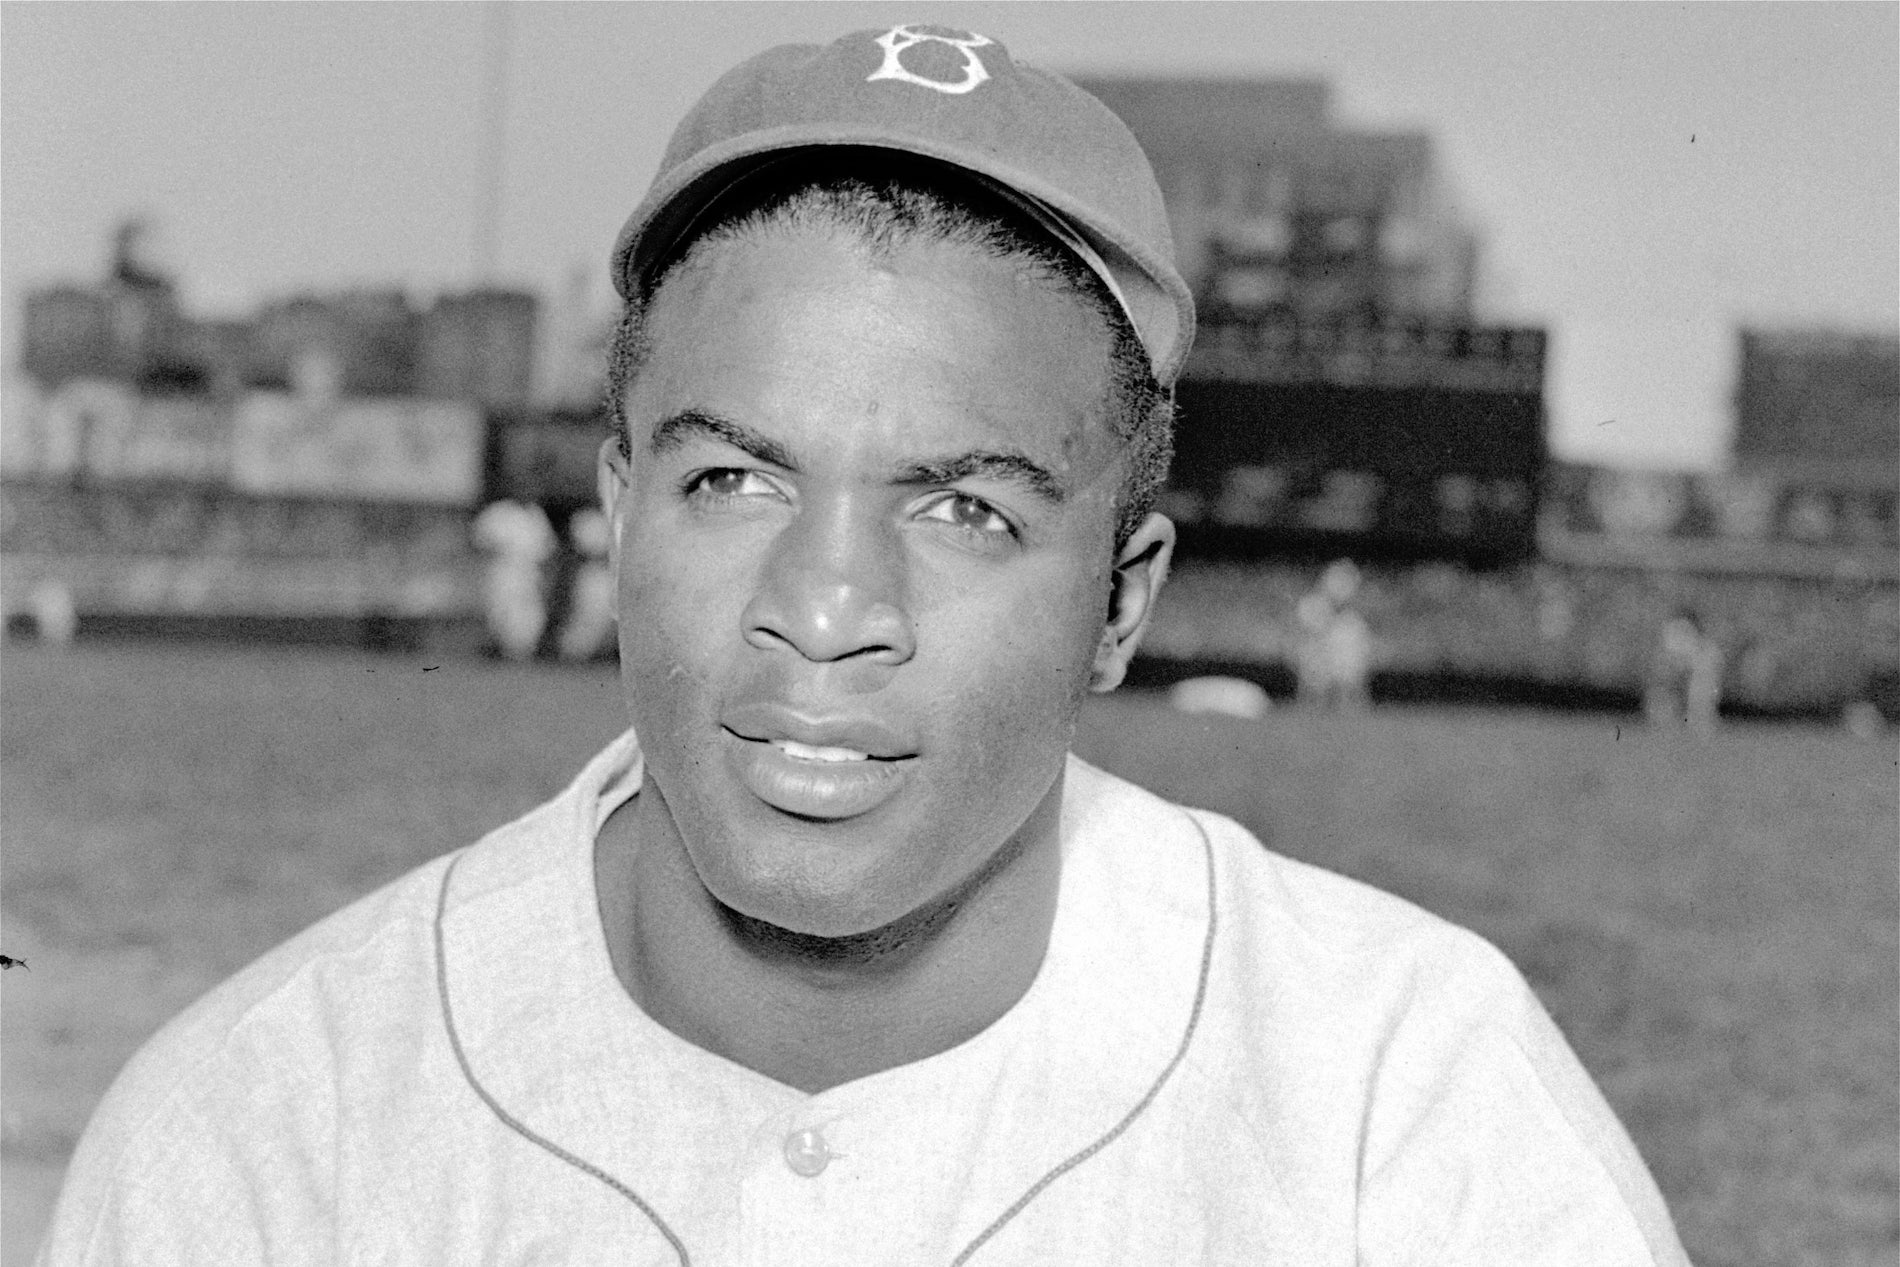 How The Dodgers & MLB Are Celebrating Jackie Robinson Day 2023